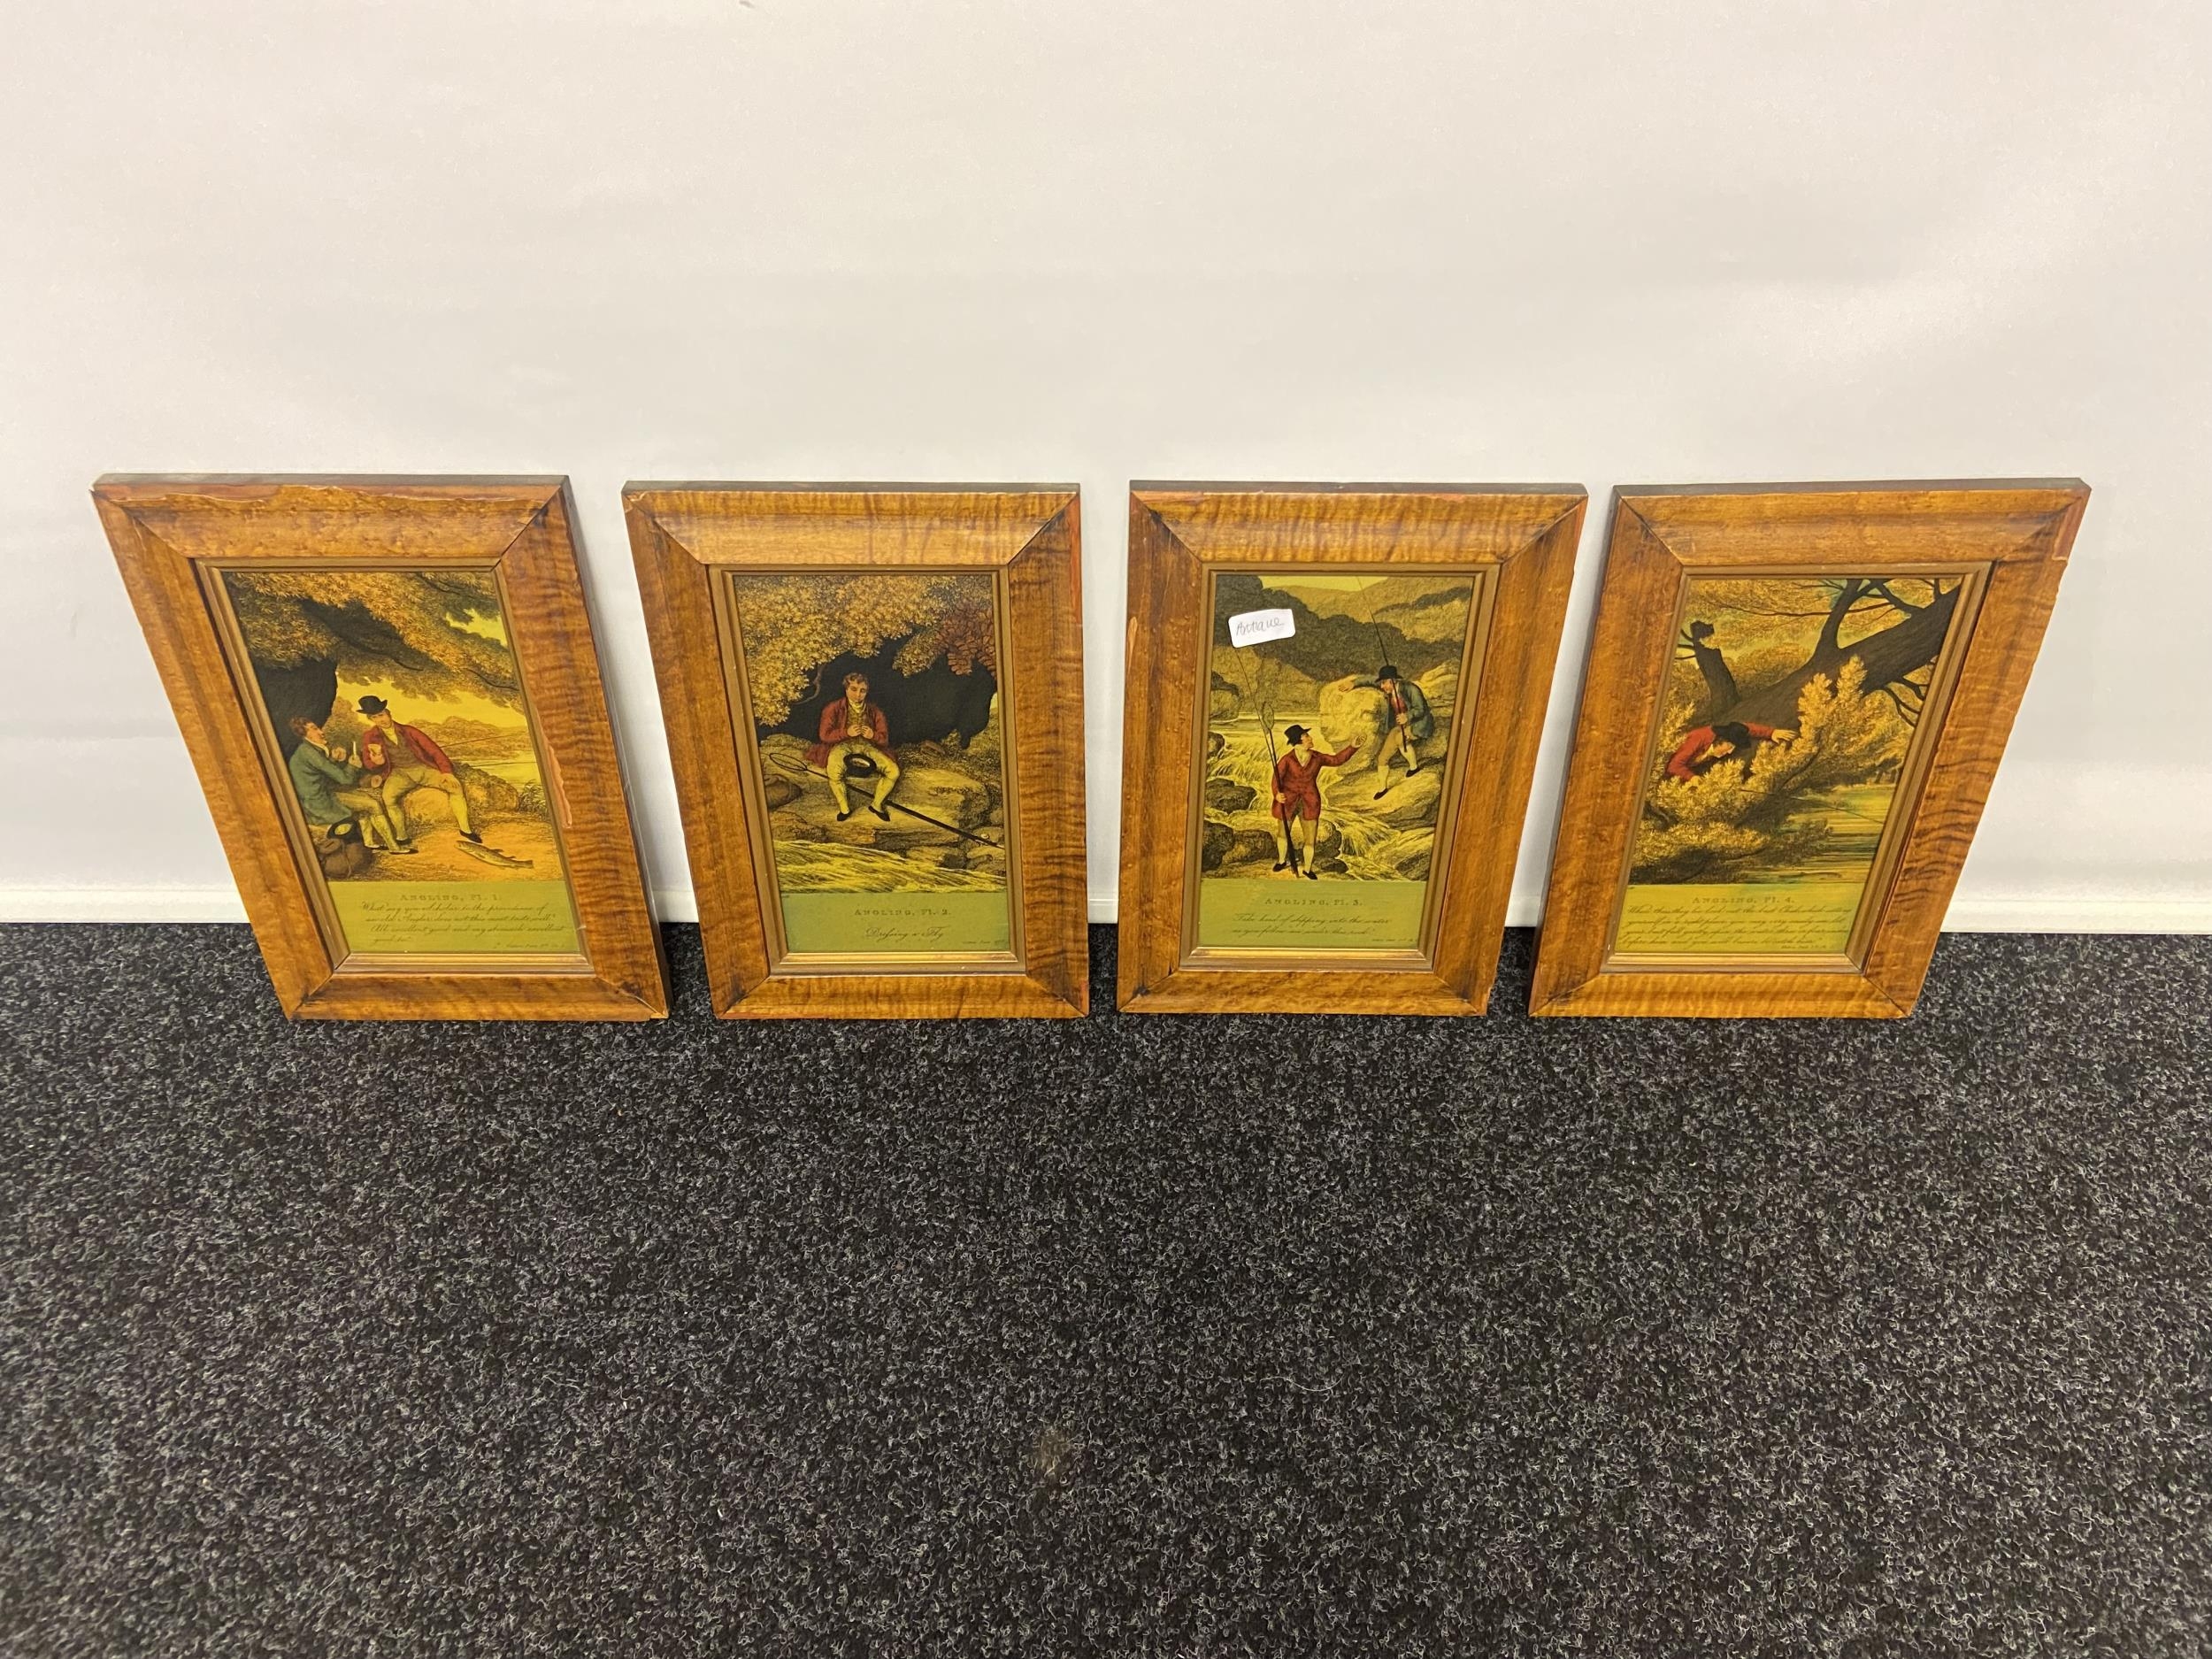 A Lot of four antique 18th/ 19th century four part angling story, painted panels. Fitted within Bird